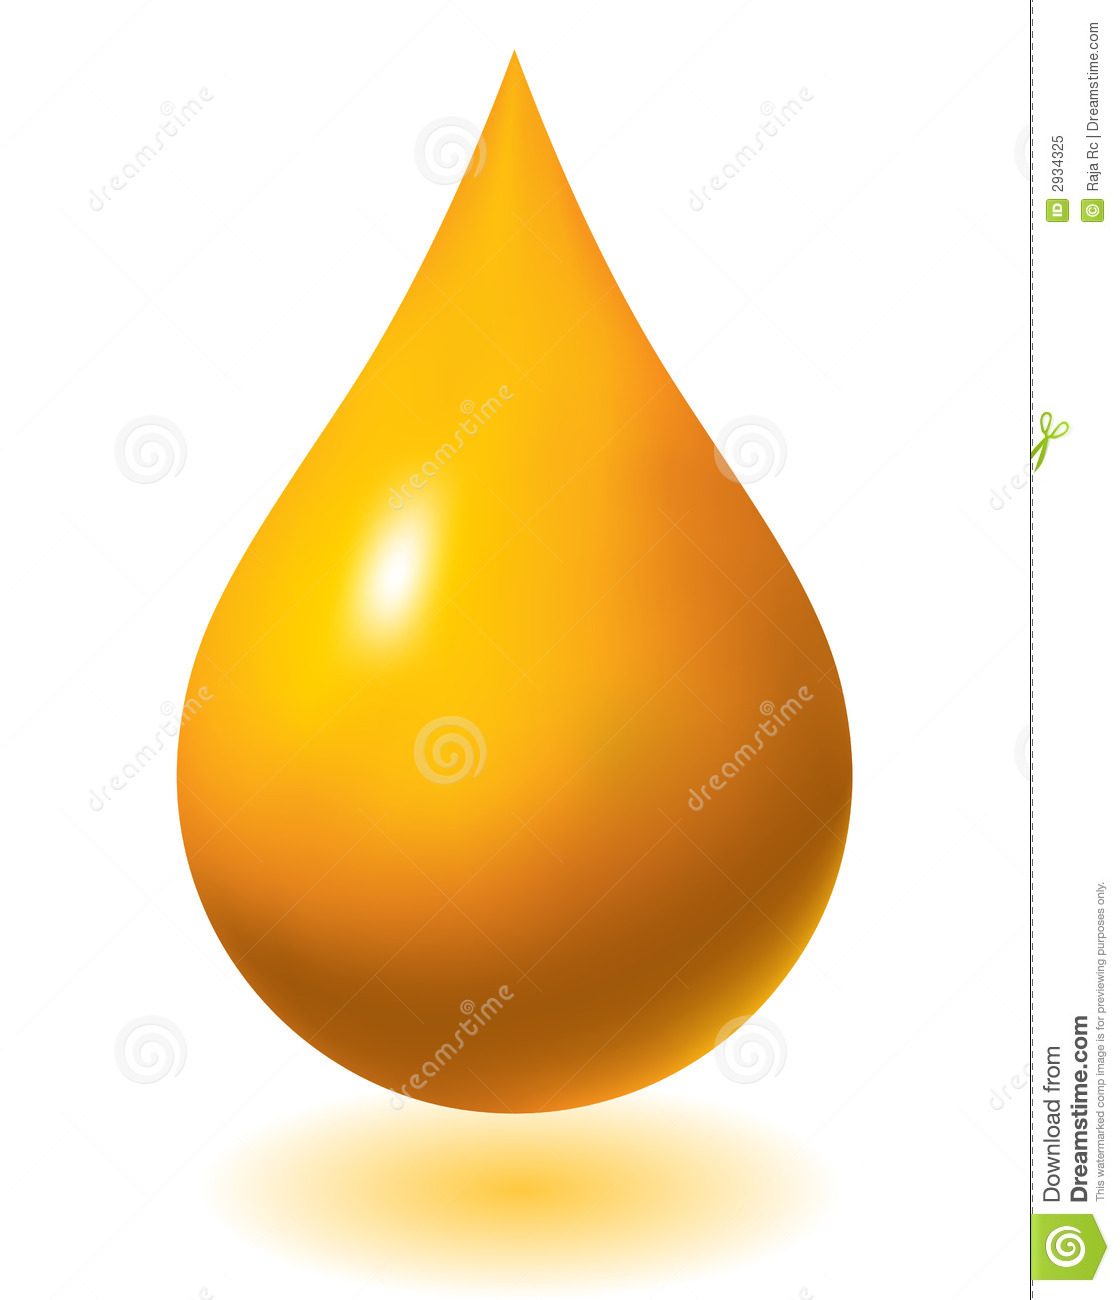 Oil Drop Clipart Oil Drop Royalty Free Stock